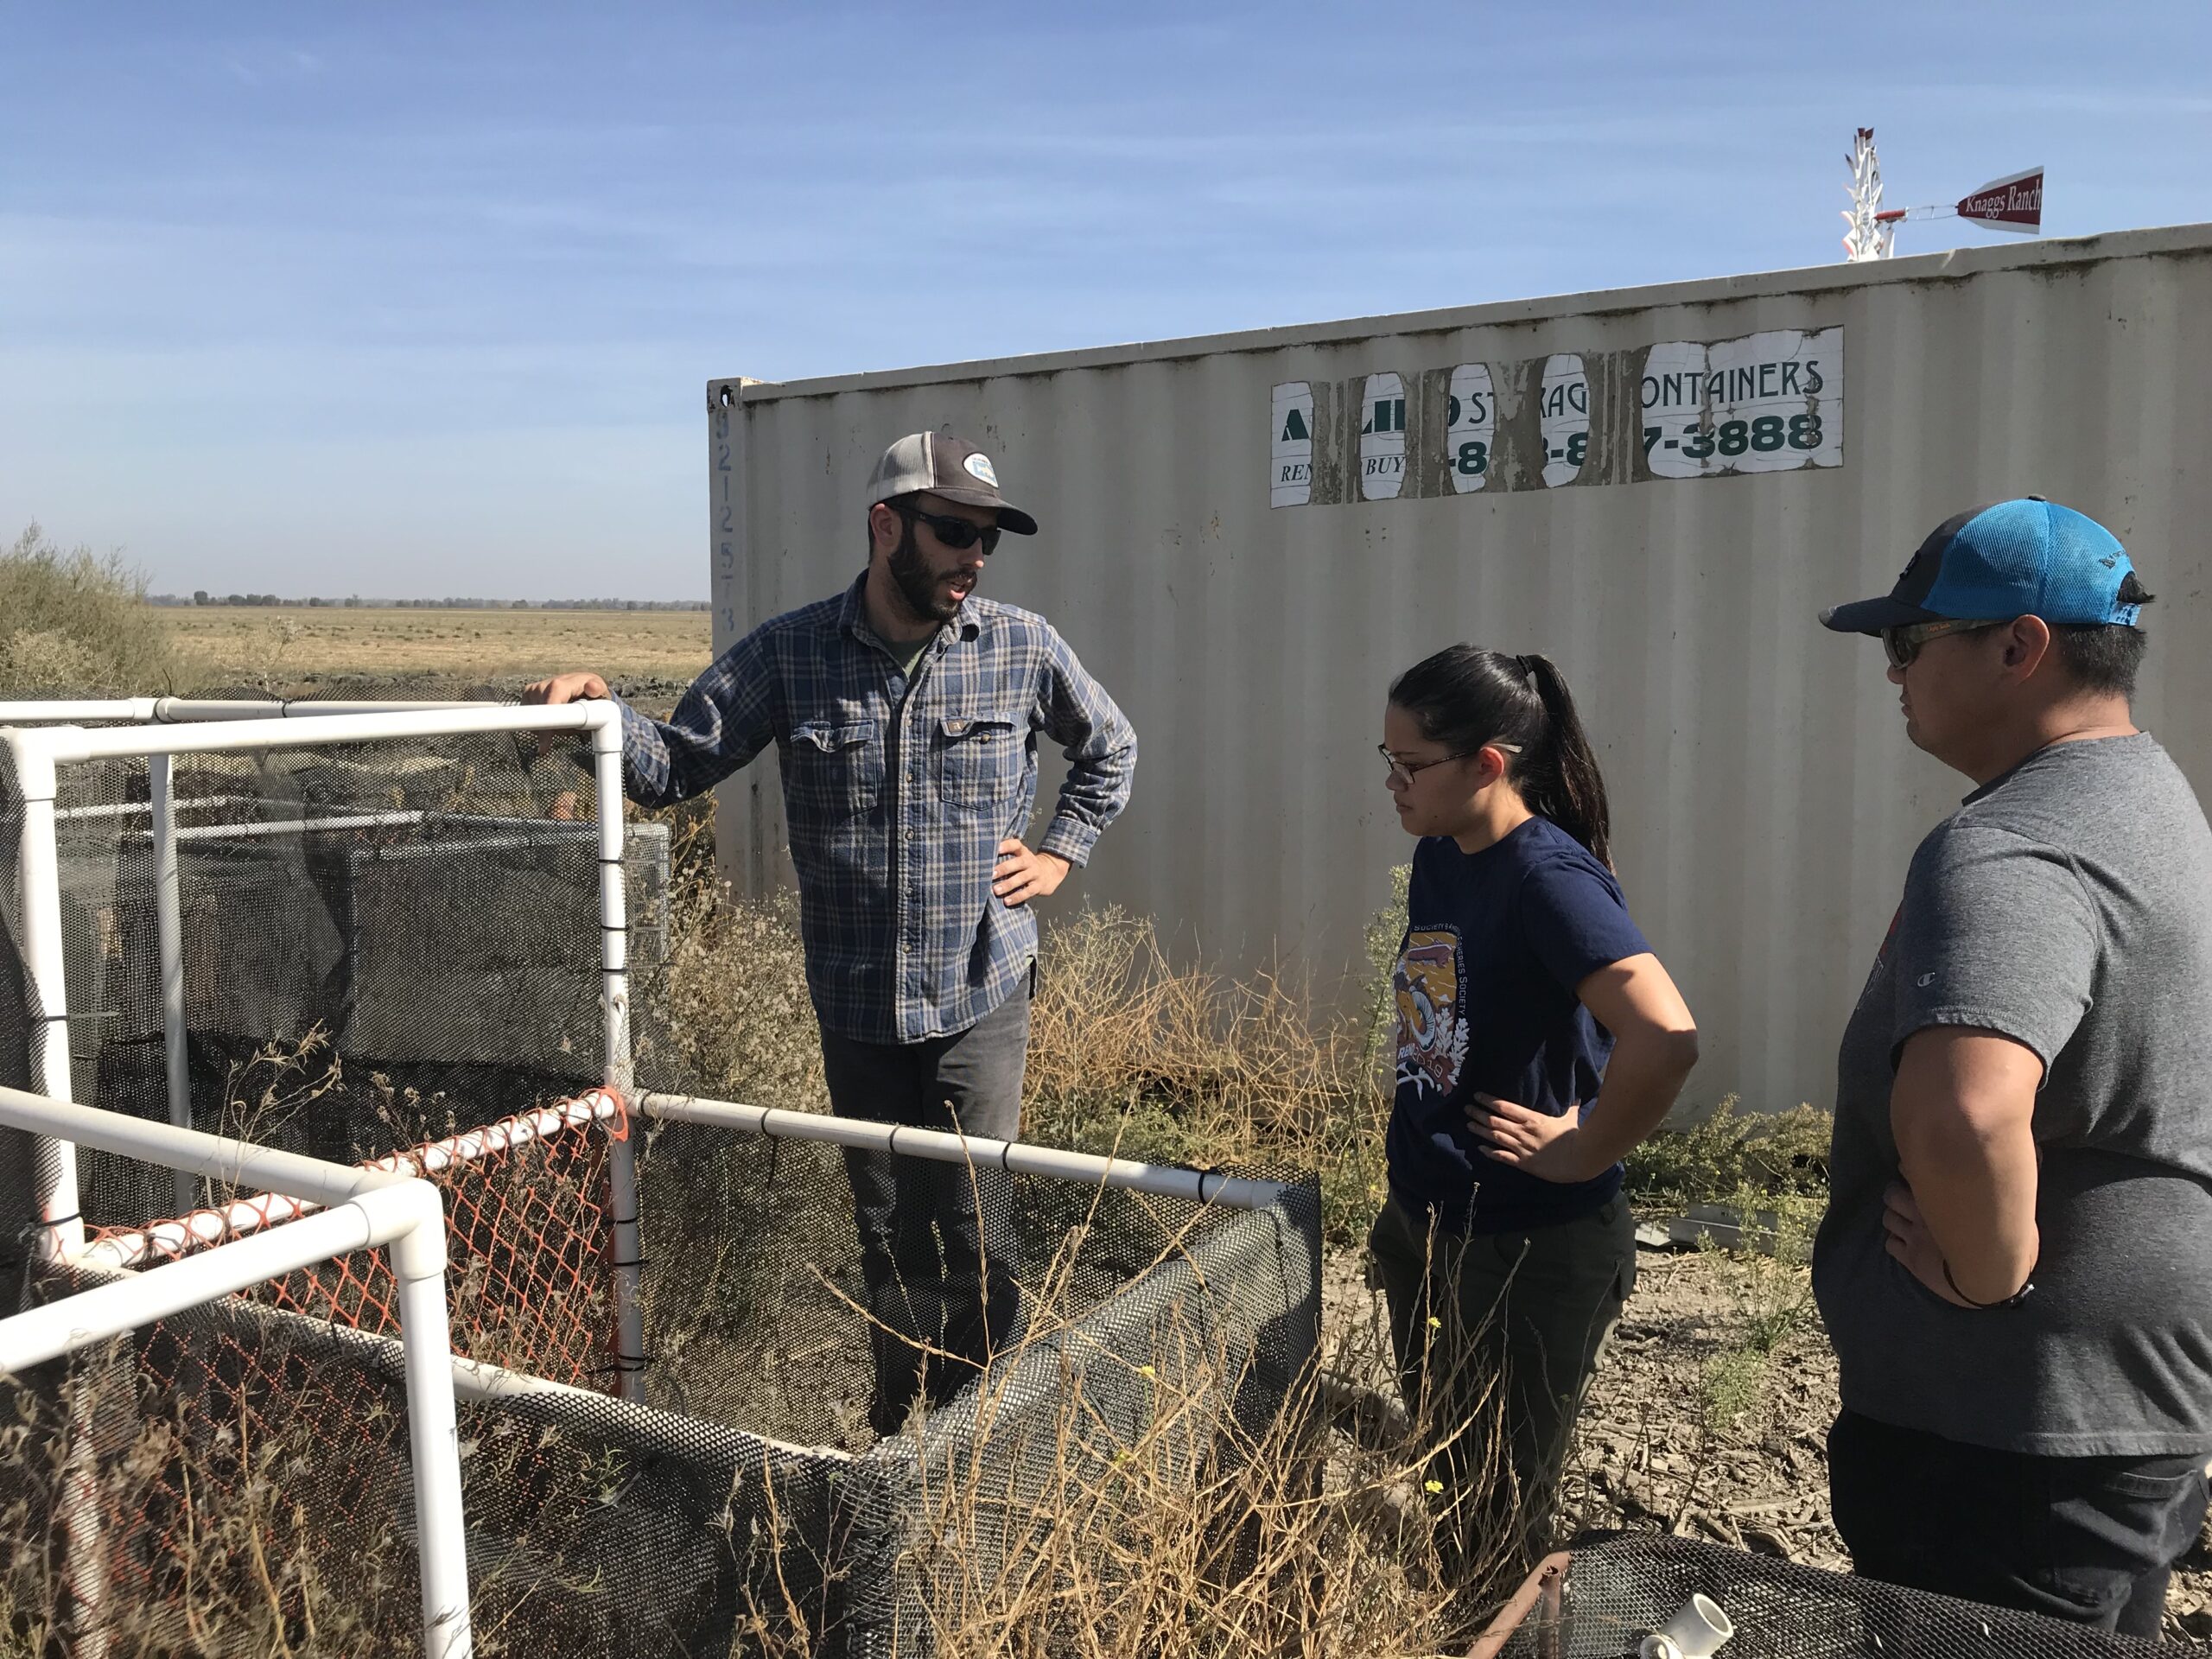 John Brennan, Andrew Rypel and Rachelle Tallman discussing the suitability of doing part of the field work at Knagg’s Ranch